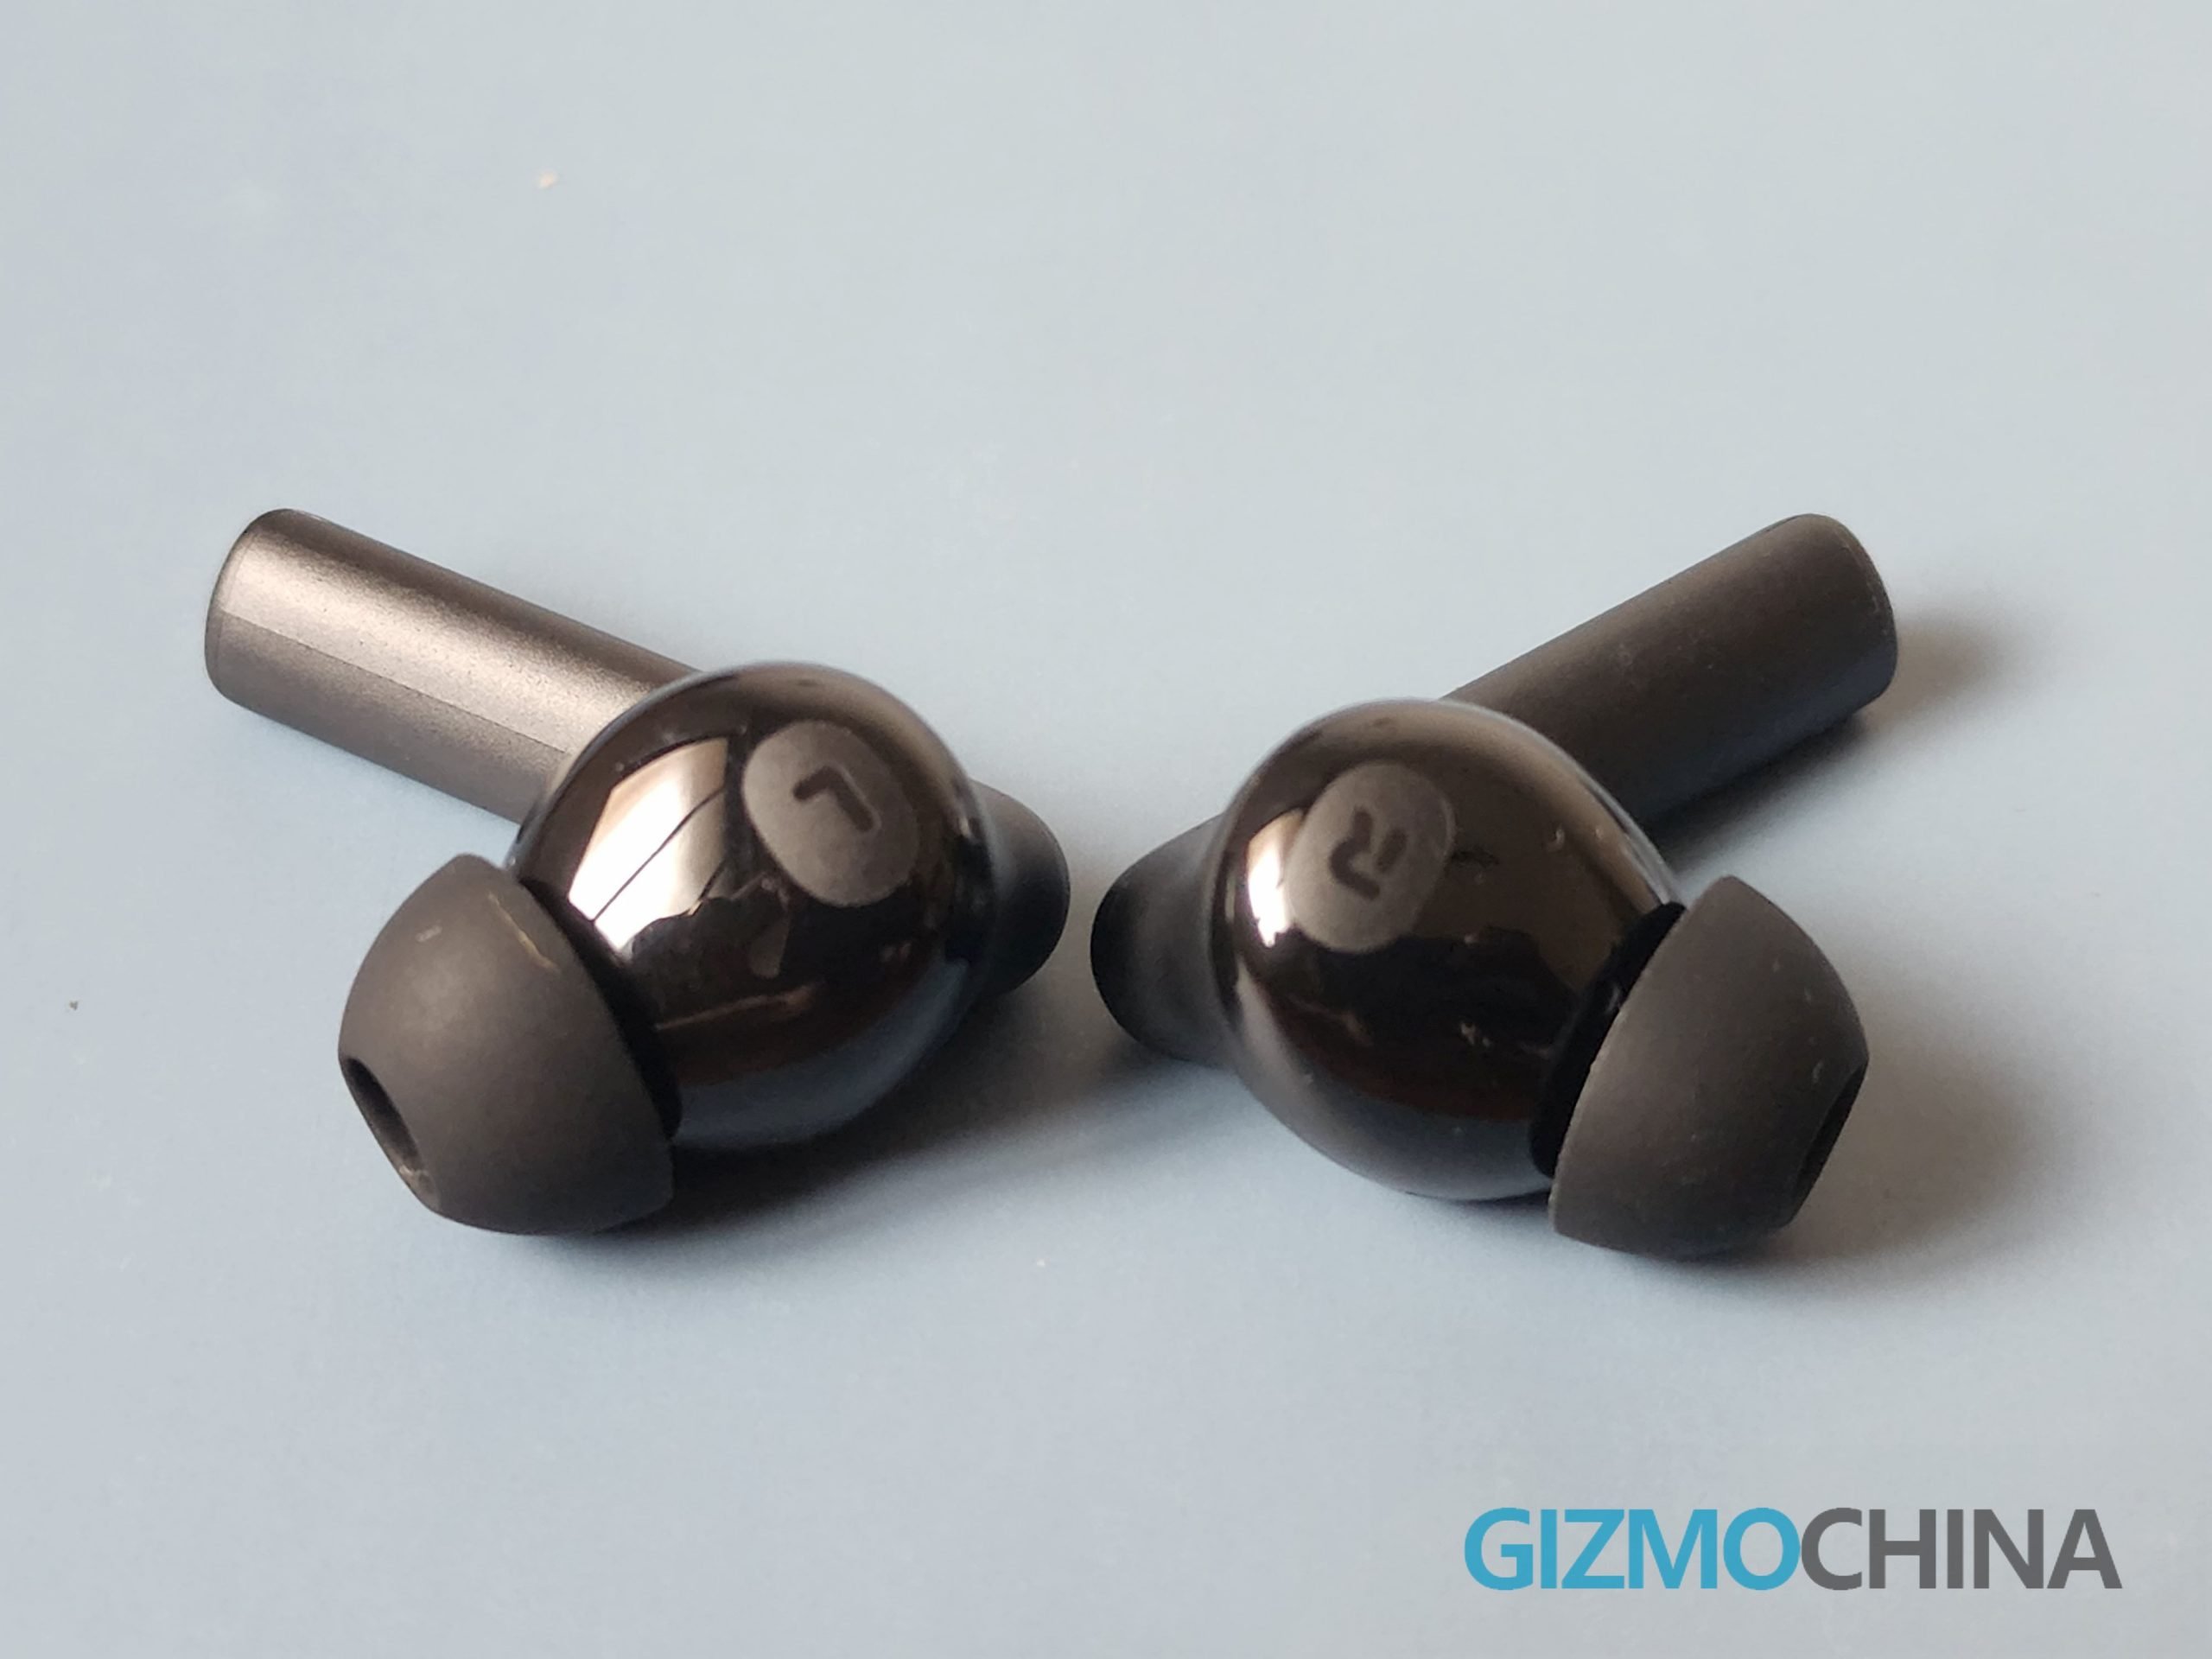 Oppo Enco Buds 2 review: Great sound and design under Rs 2,000